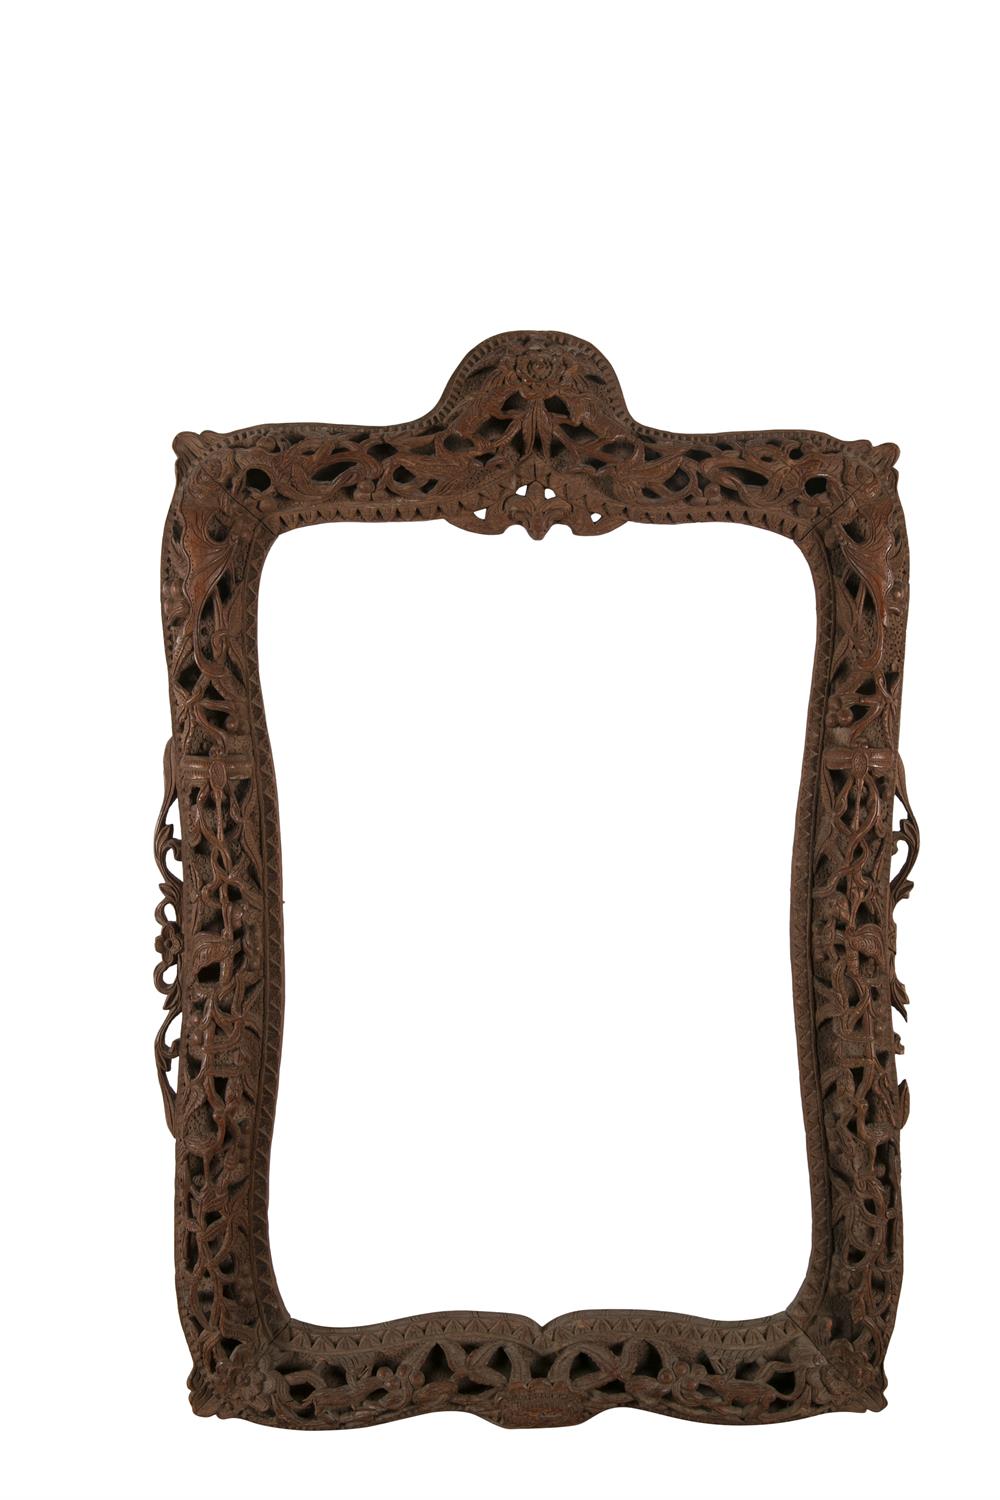 AN INTRICATELY CARVED 'BEASTS AND BIRDS' WOODEN FRAME Vietnam, Nguyen Dynasty, Circa 1900 H: 62 cm - - Image 4 of 6